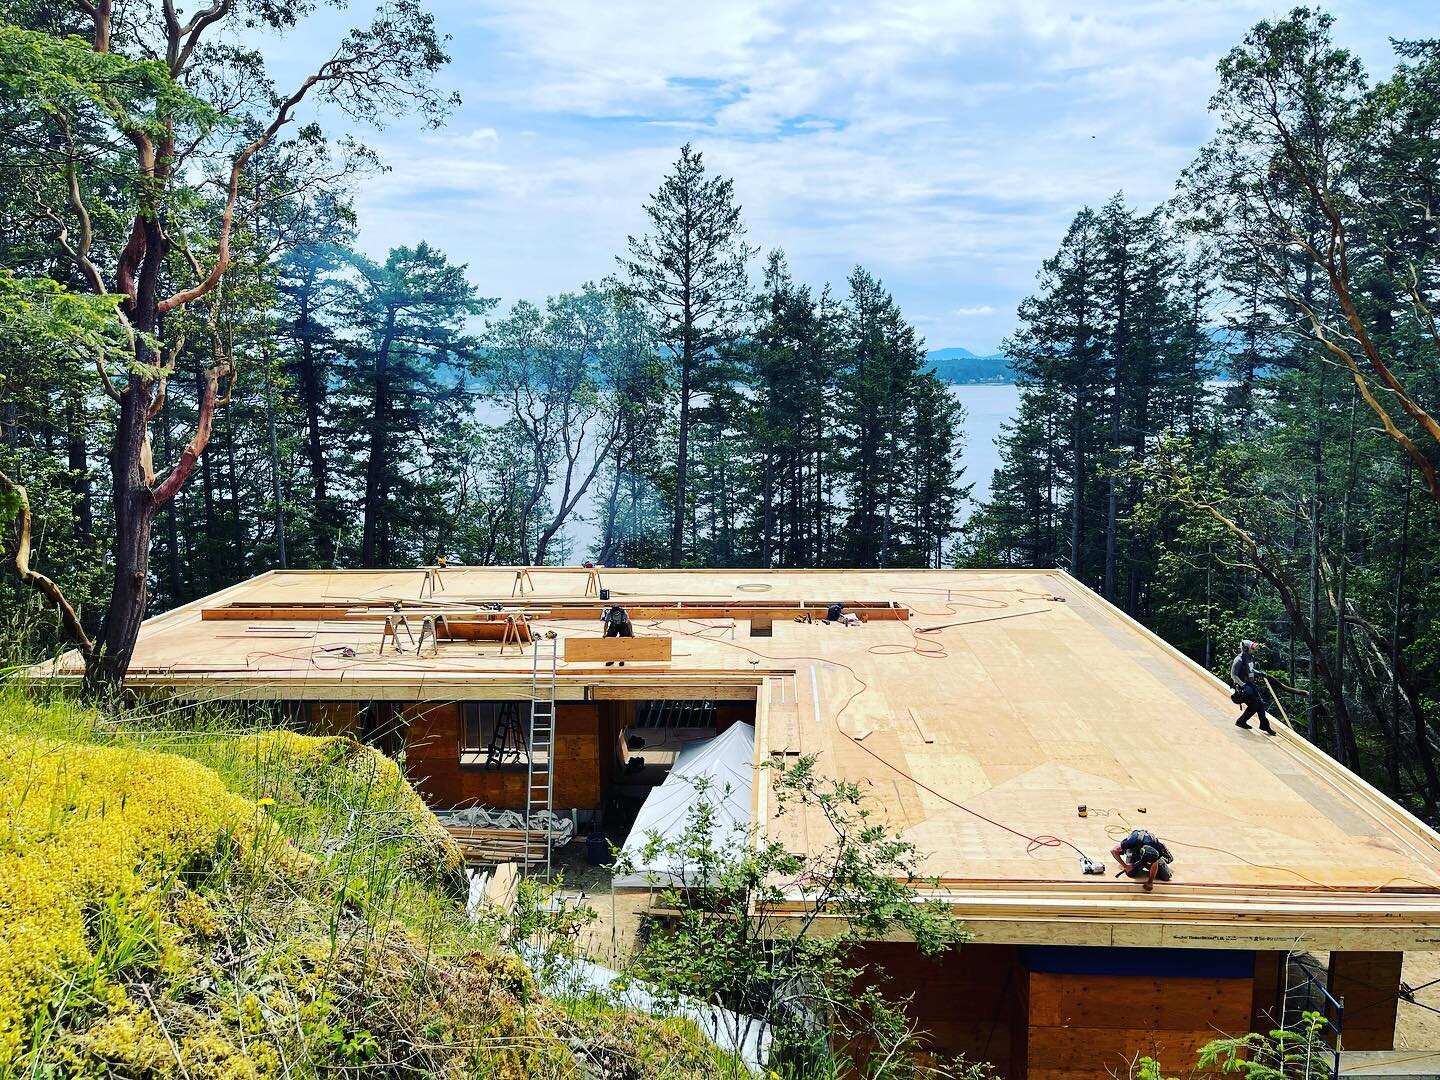 All time flat roof ☑️ let the roofing party begin 🍻🎉 thanks to the dedicated salty crew for crushing all winter long. #cheers #saltspringisland